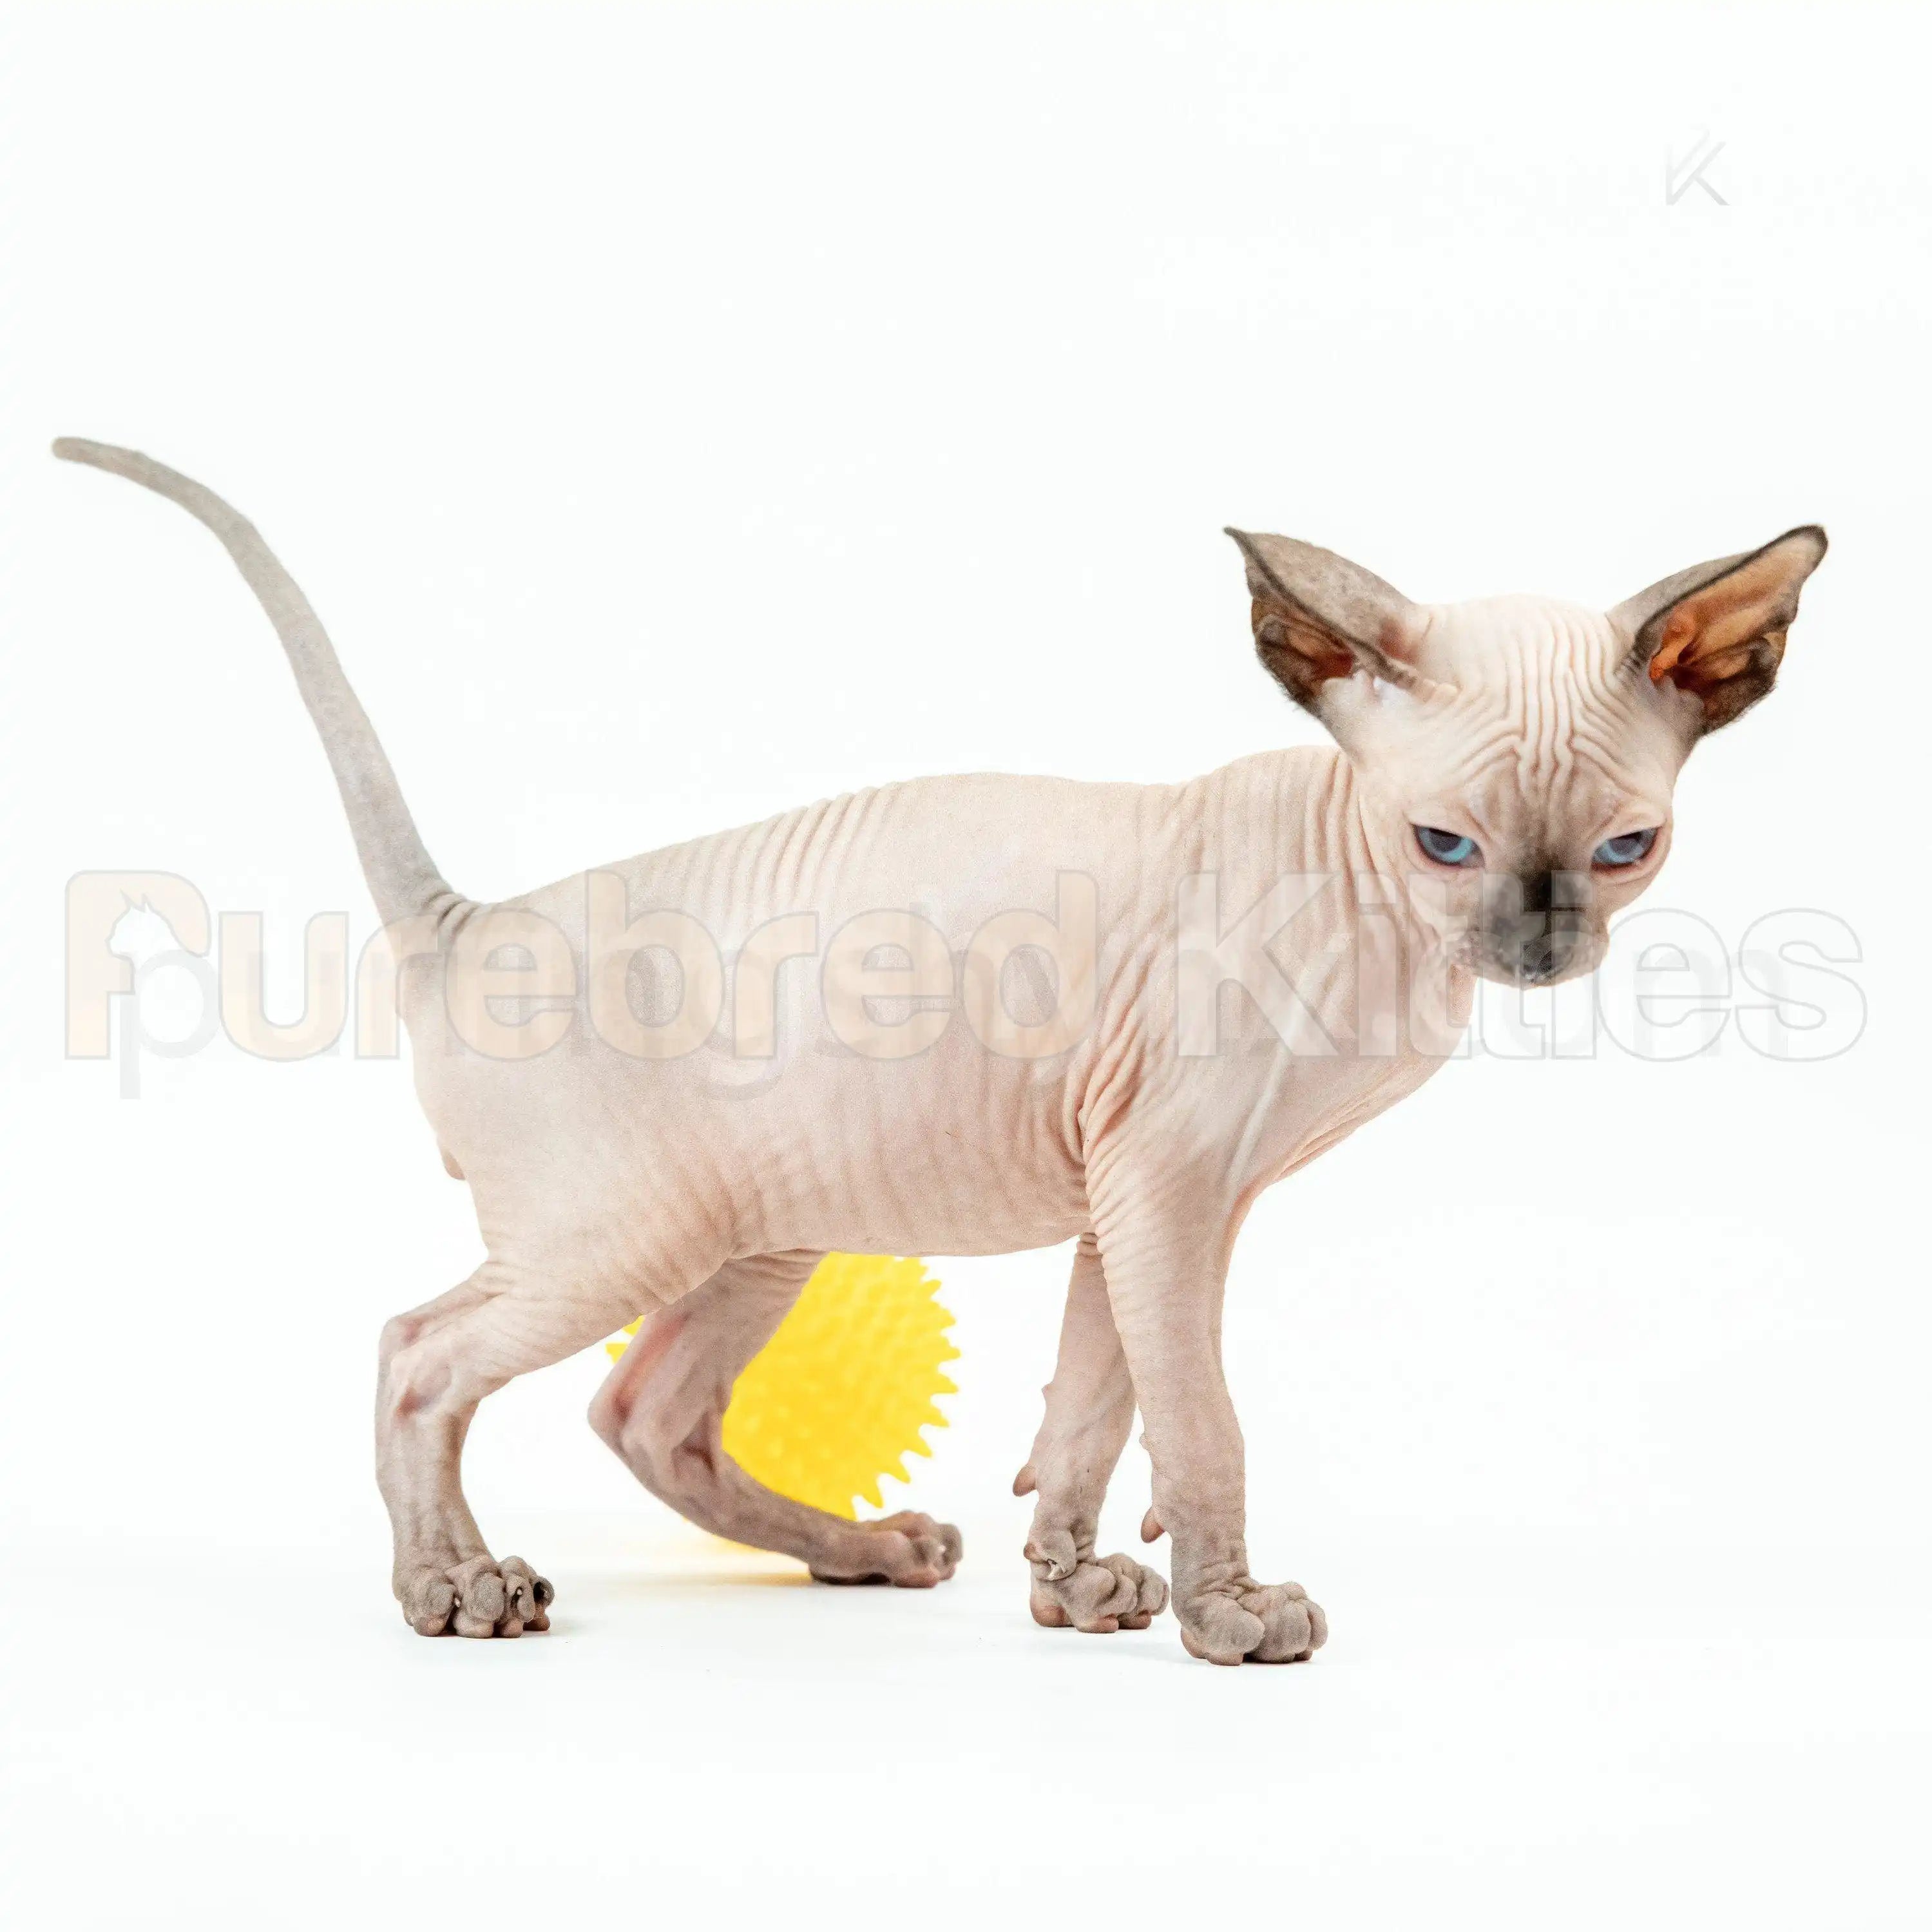 Sphynx Cats and Kittens for Sale Yoda | Kitten